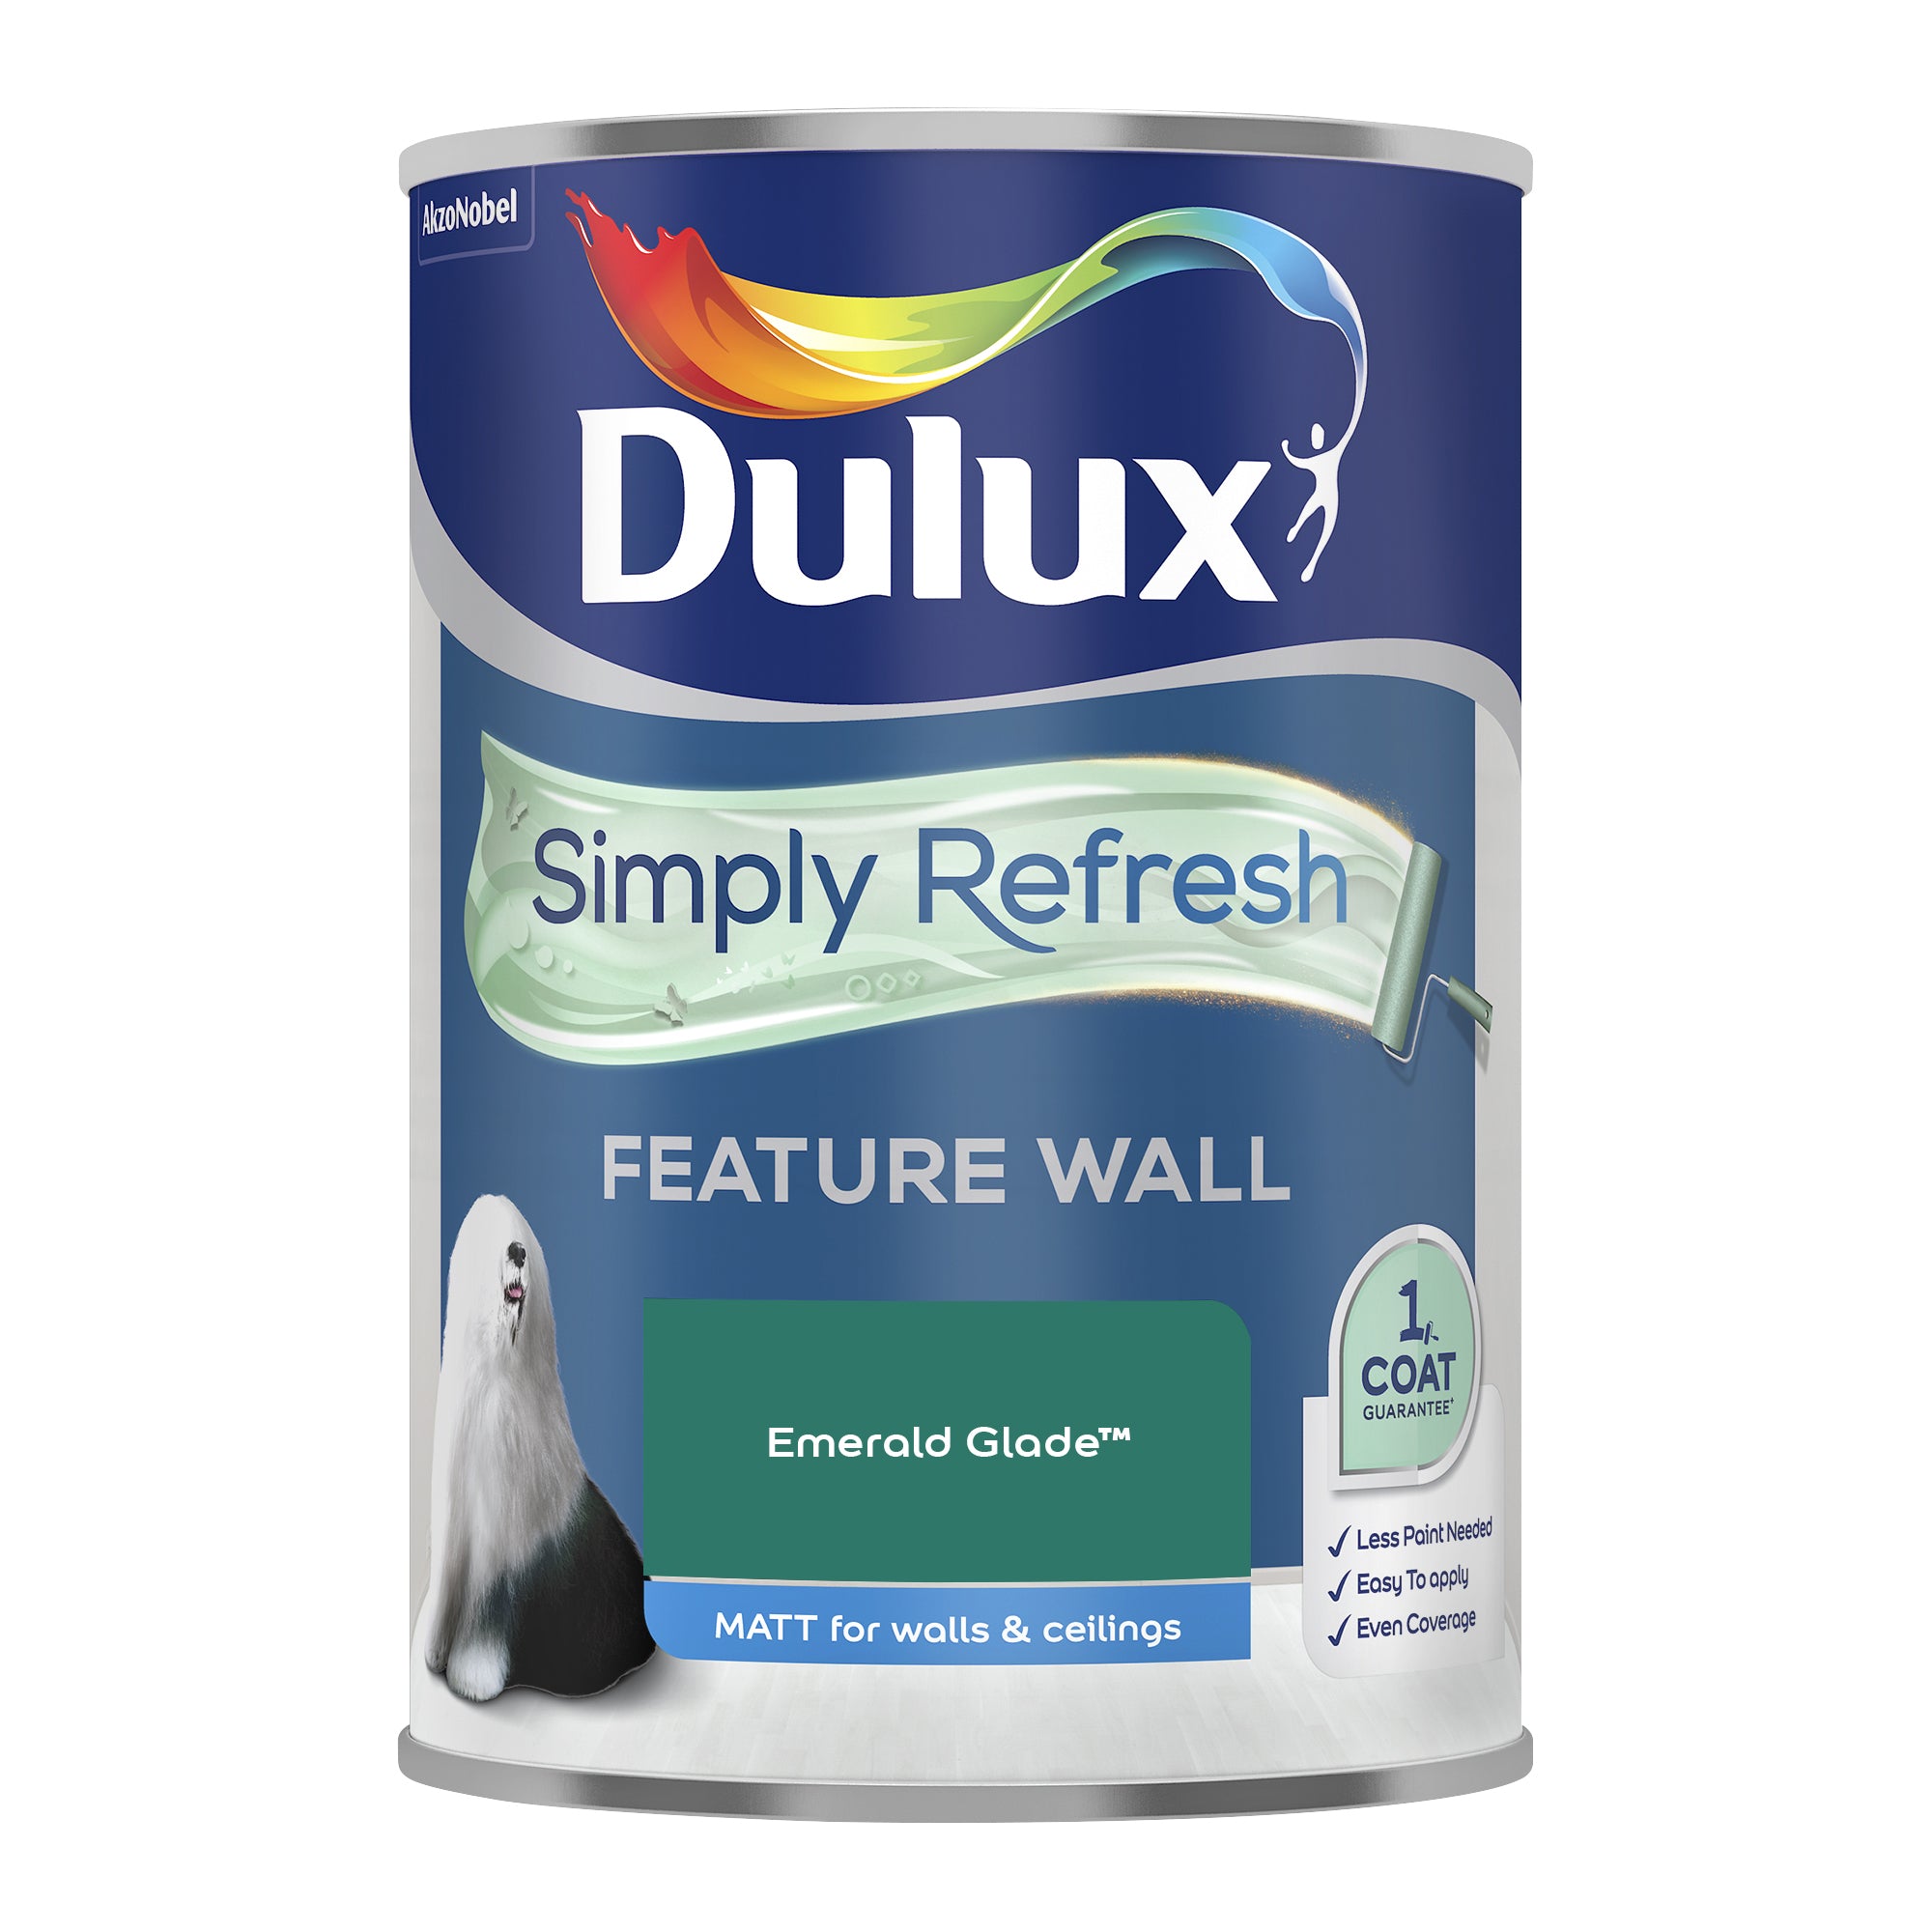 Dulux Simply Refresh One Coat Feature Wall Emerald Glade 1.25L